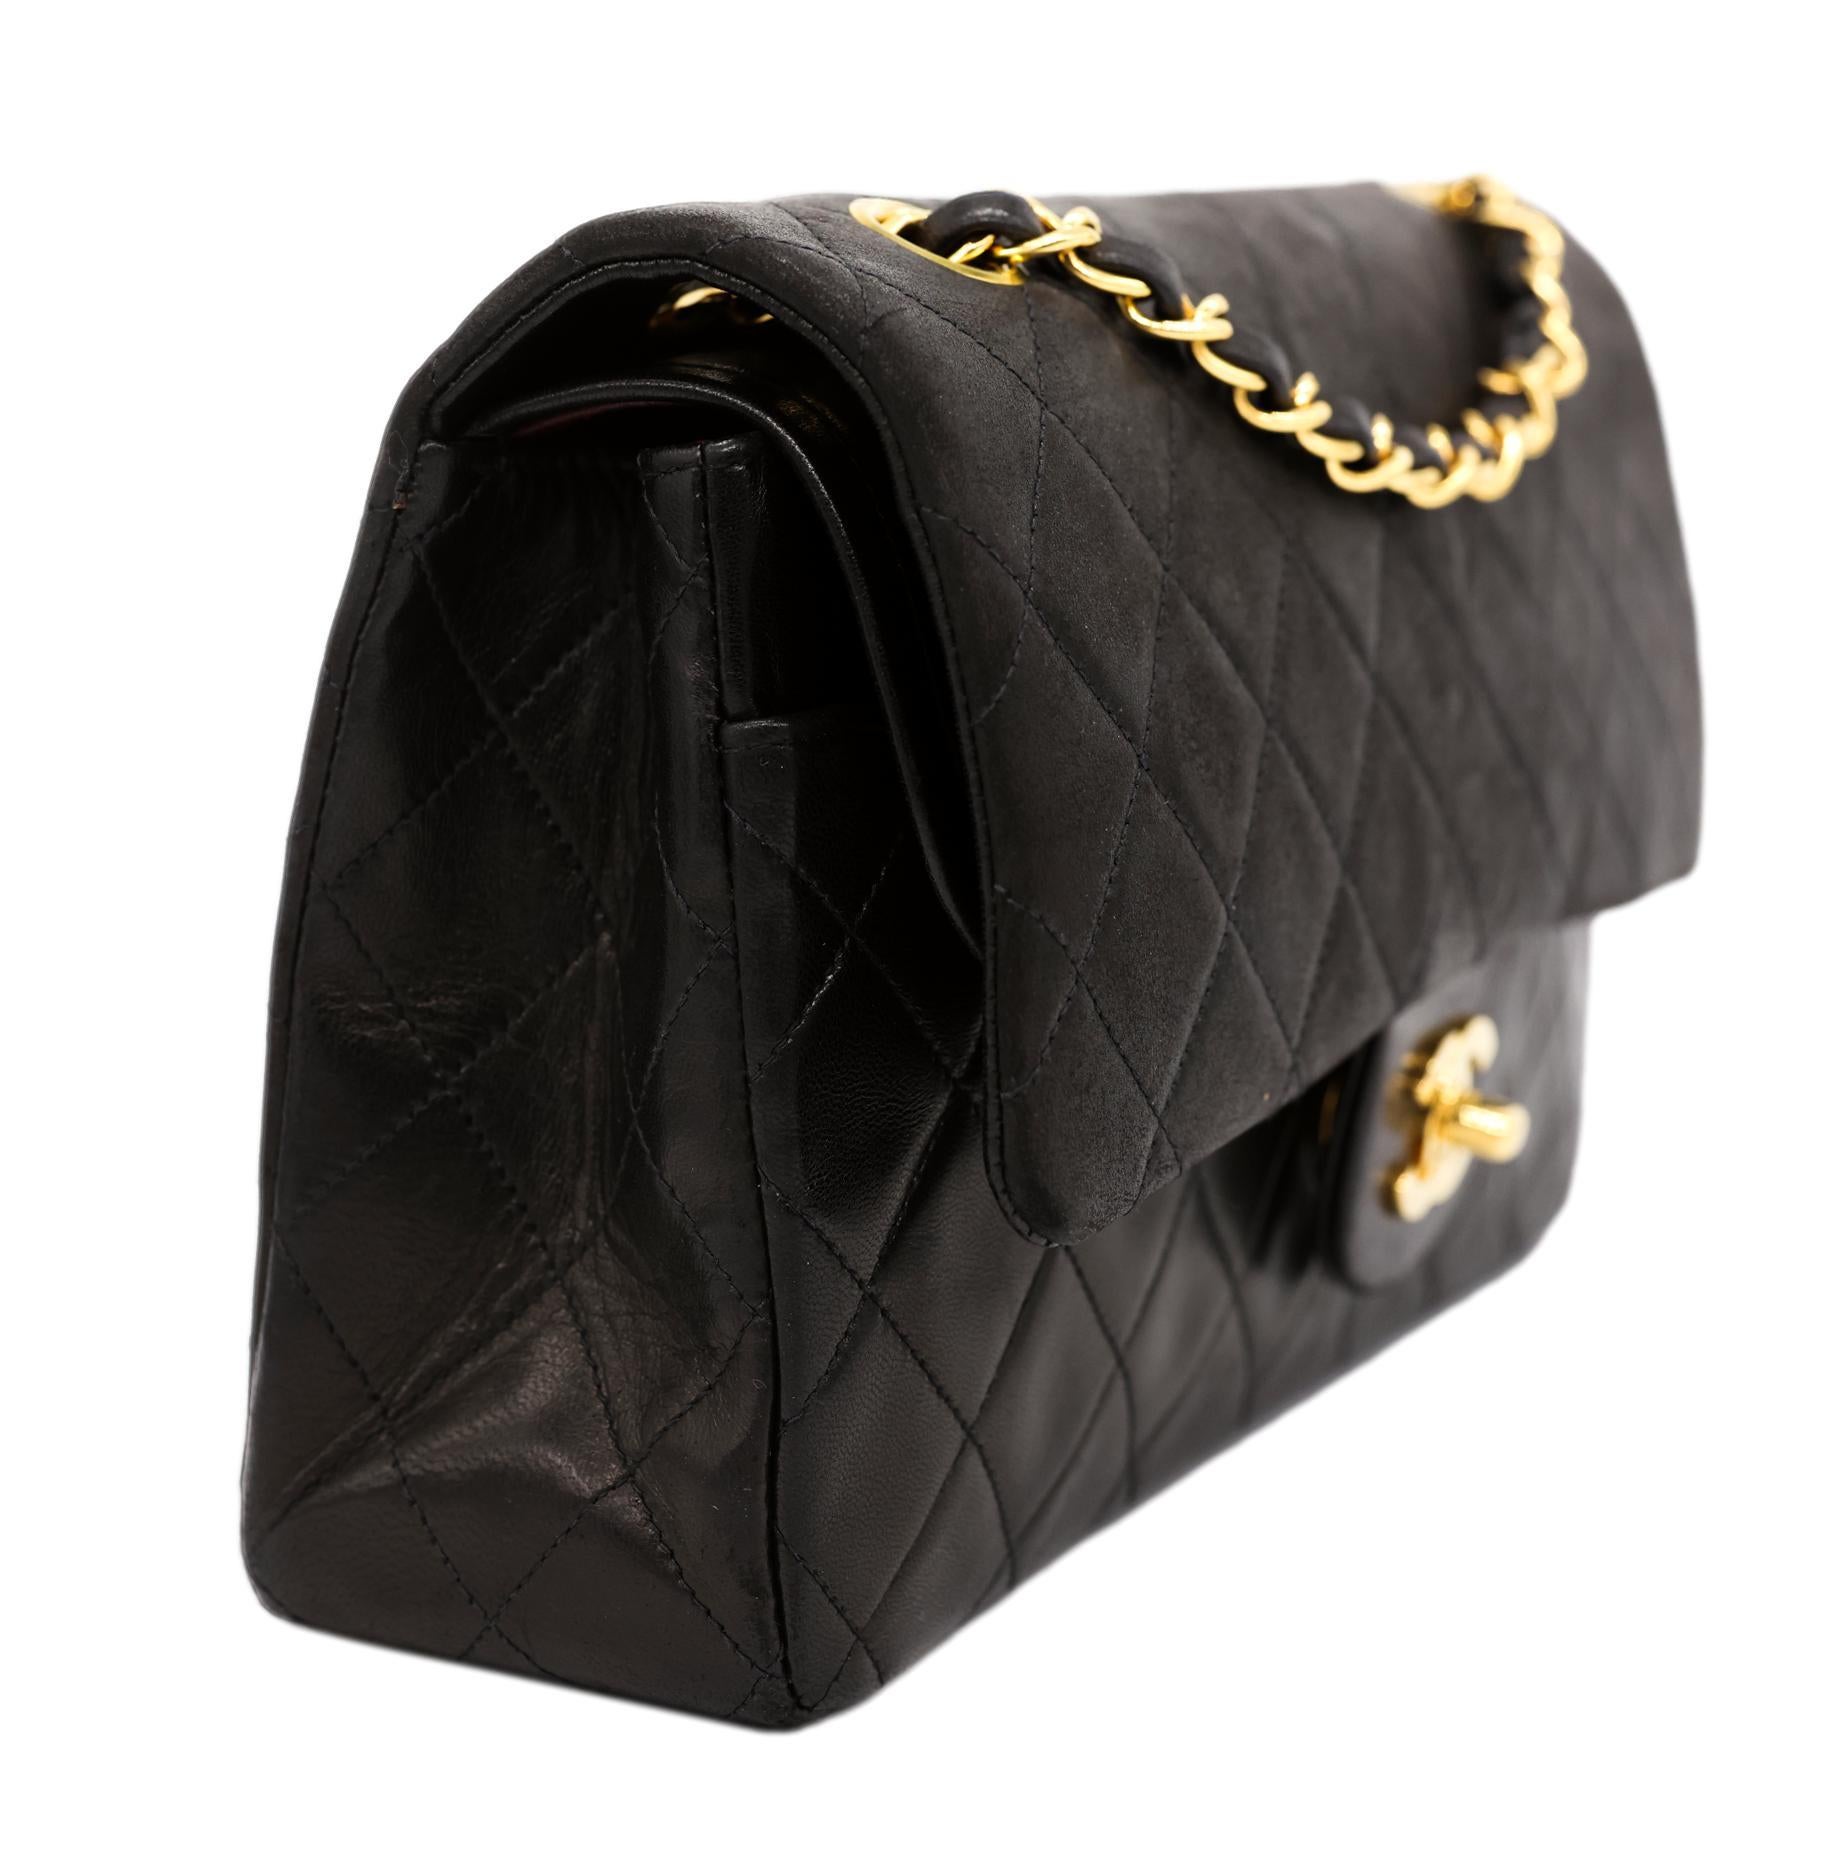 Chanel Timeless Black Medium Double Flap Quilted Lambskin Shoulder Bag with Gold Hardware, 2019. The iconic Chanel bag was originally issued by Coco Chanel in February 1955 which became the very first socially acceptable shoulder bag for the modern